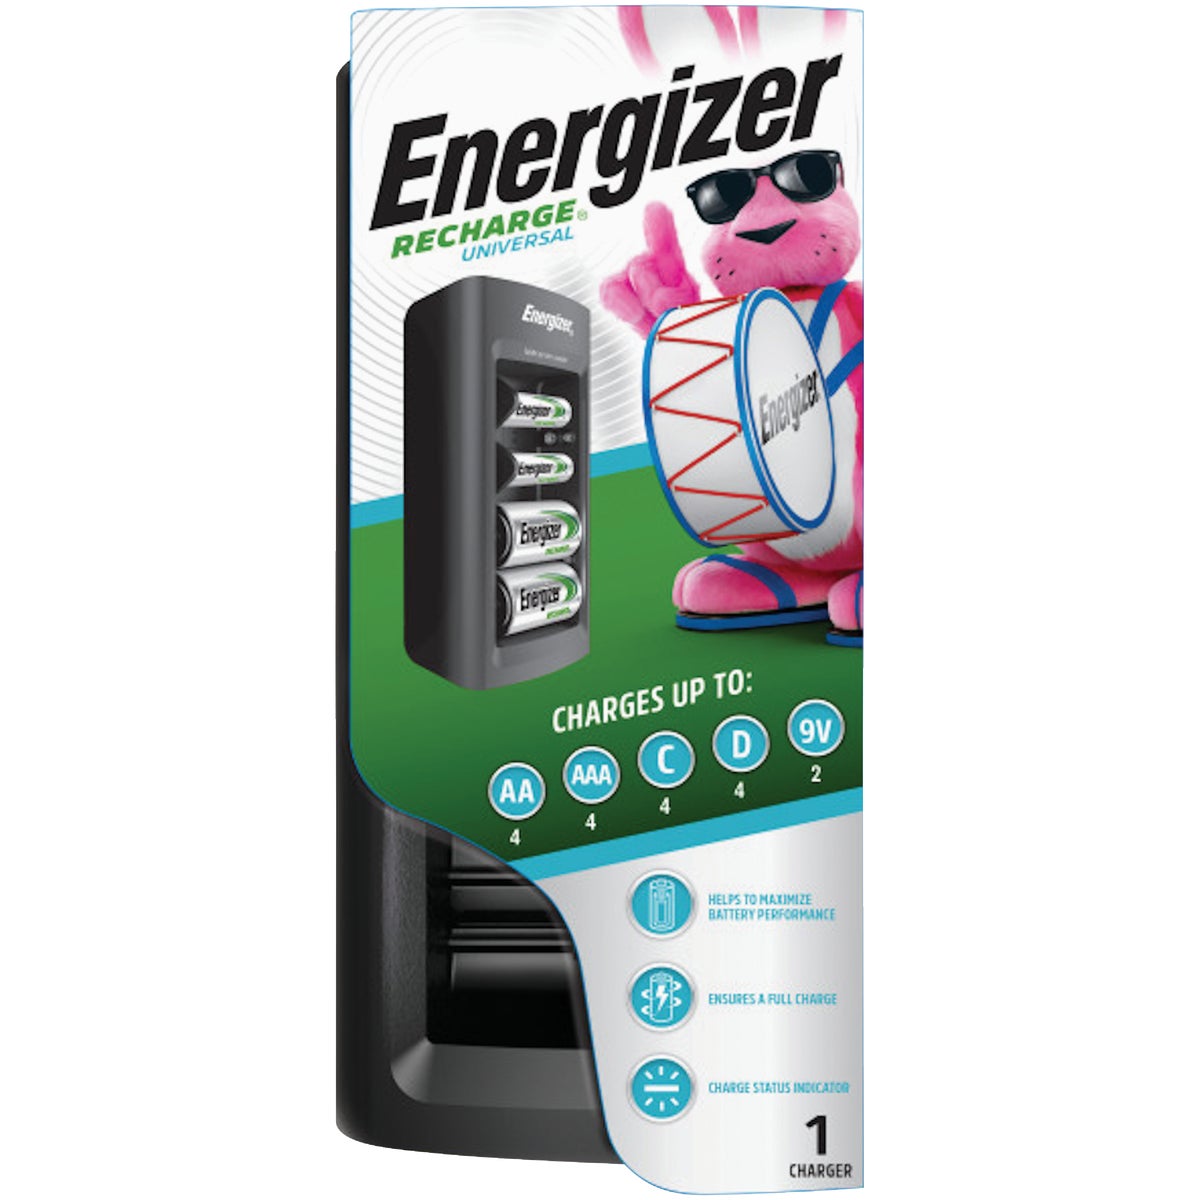 Energizer Universal Battery Charger for C, D, 9V, AA and AAA Batteries